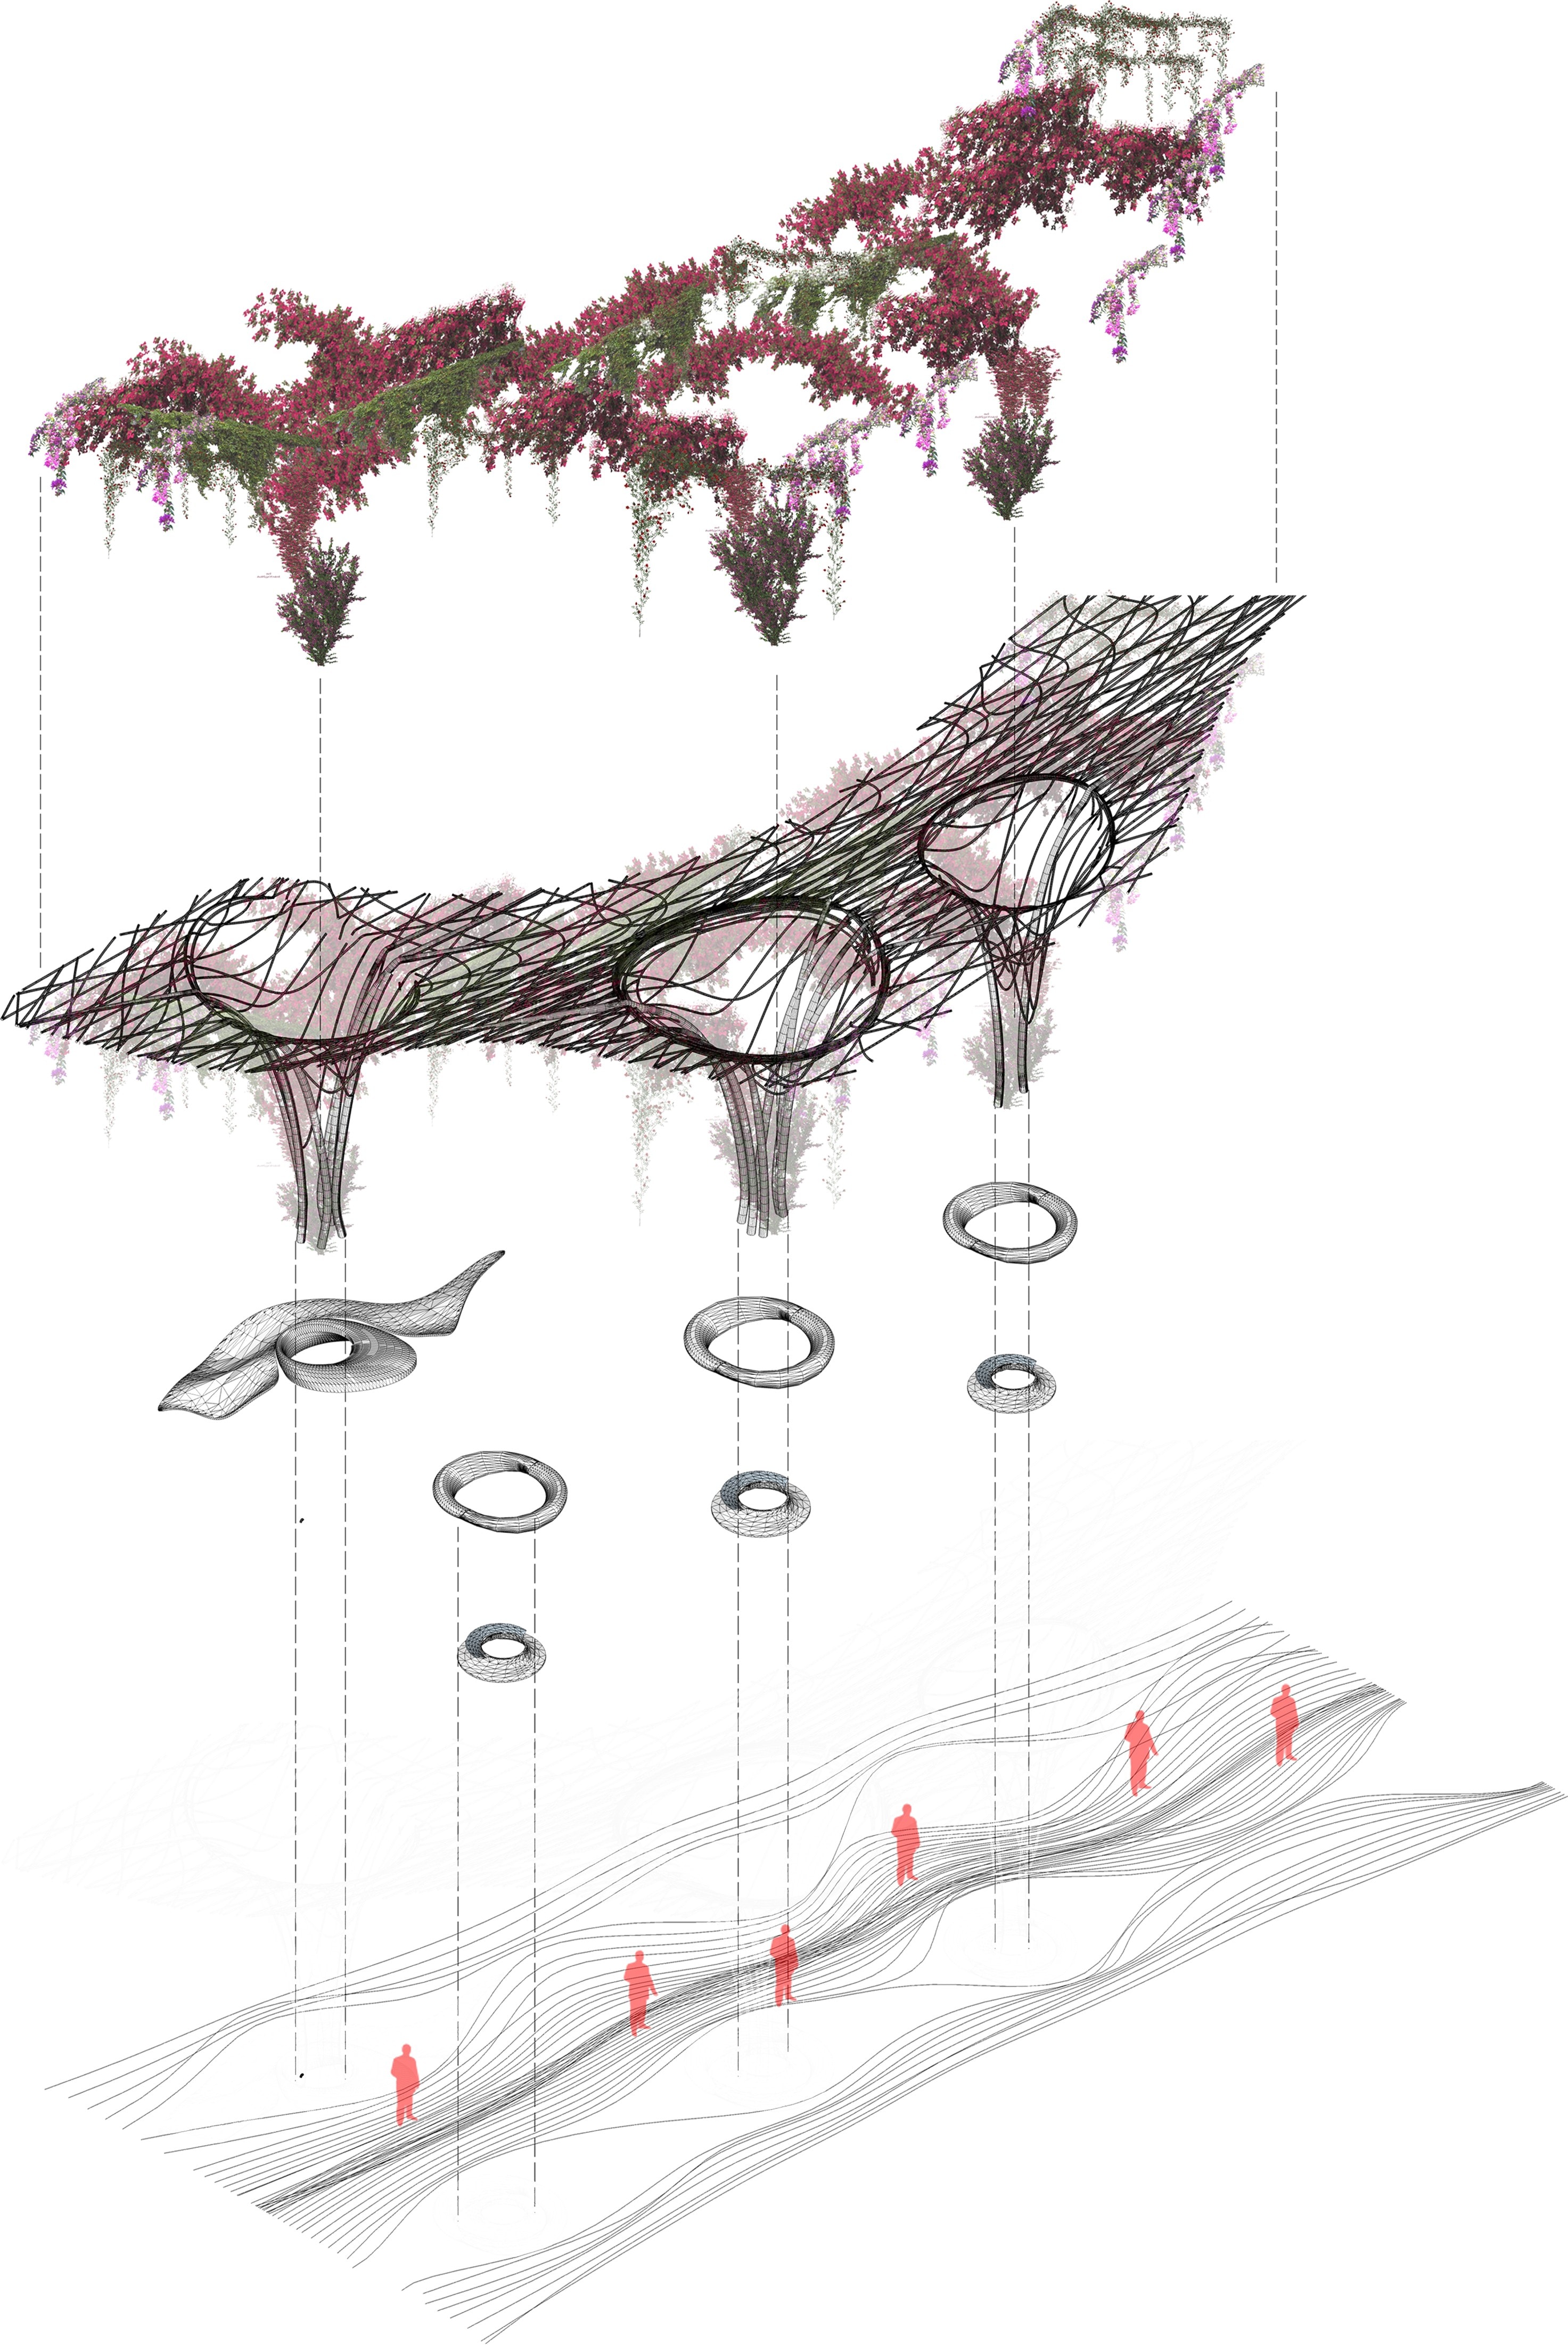 15_Competition_Hypertree_Planimetry_Kevin Abanto